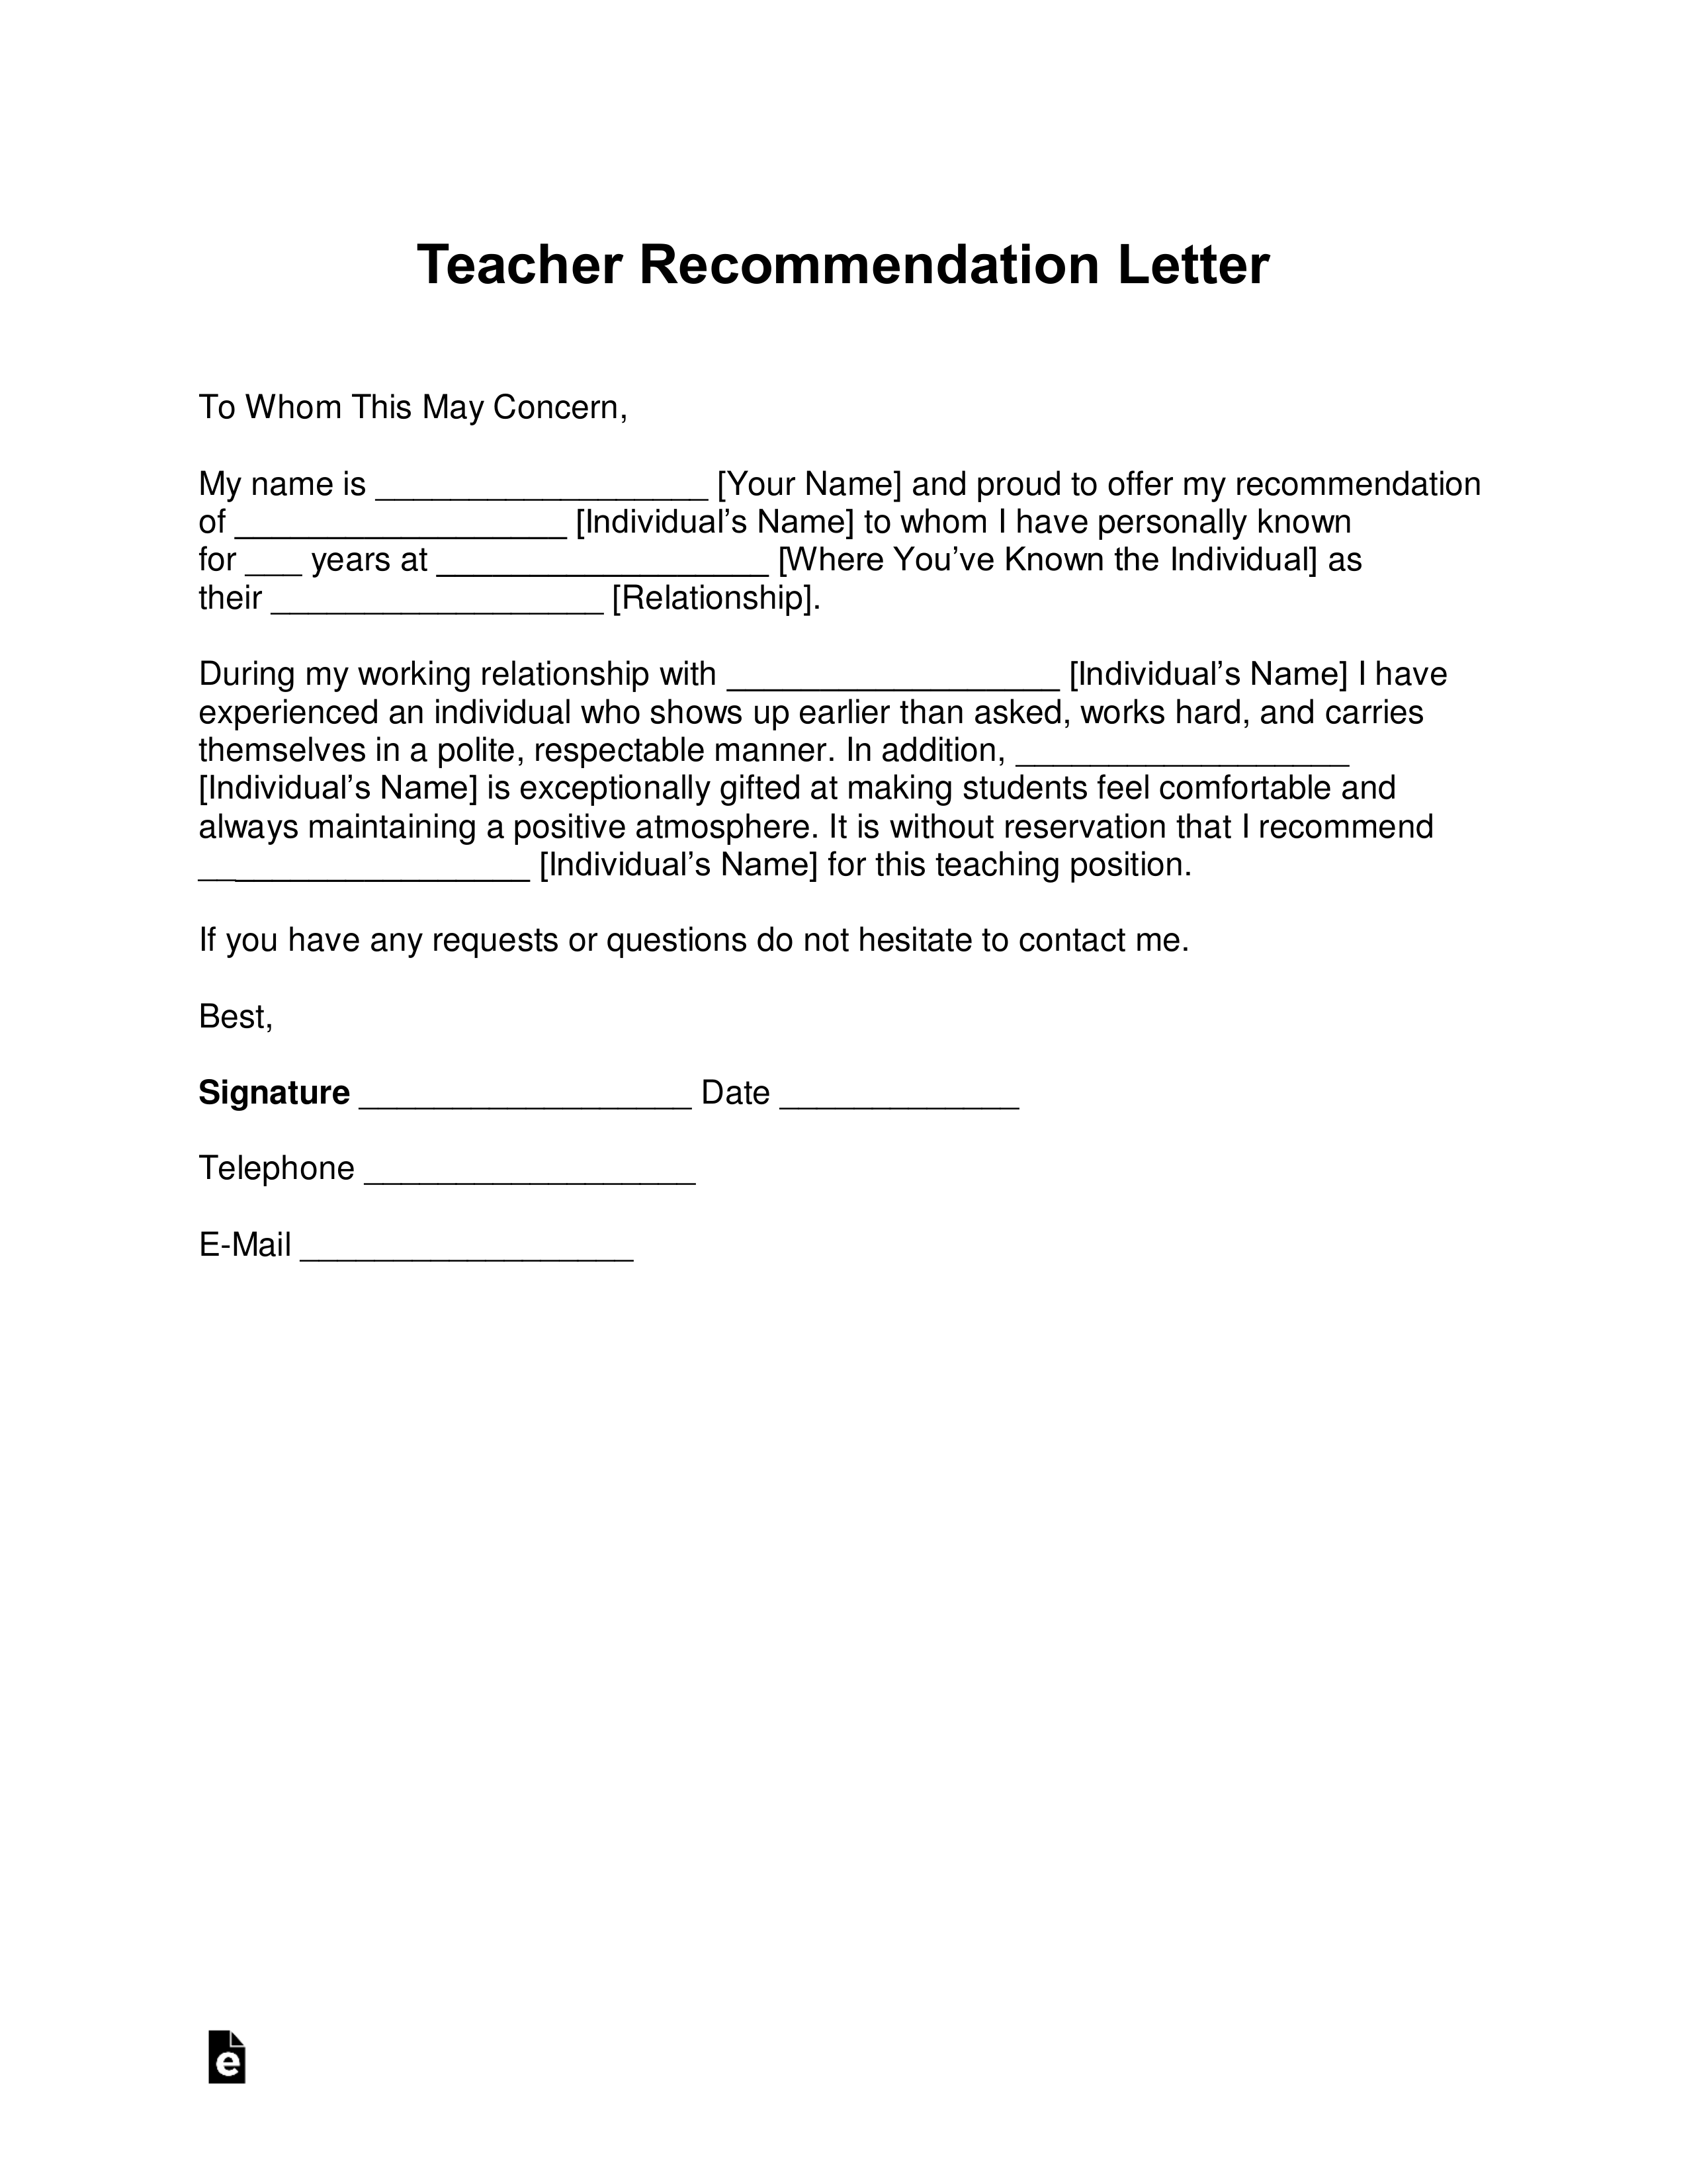 Sample Letter Of Recommendation For Elementary Student from eforms.com